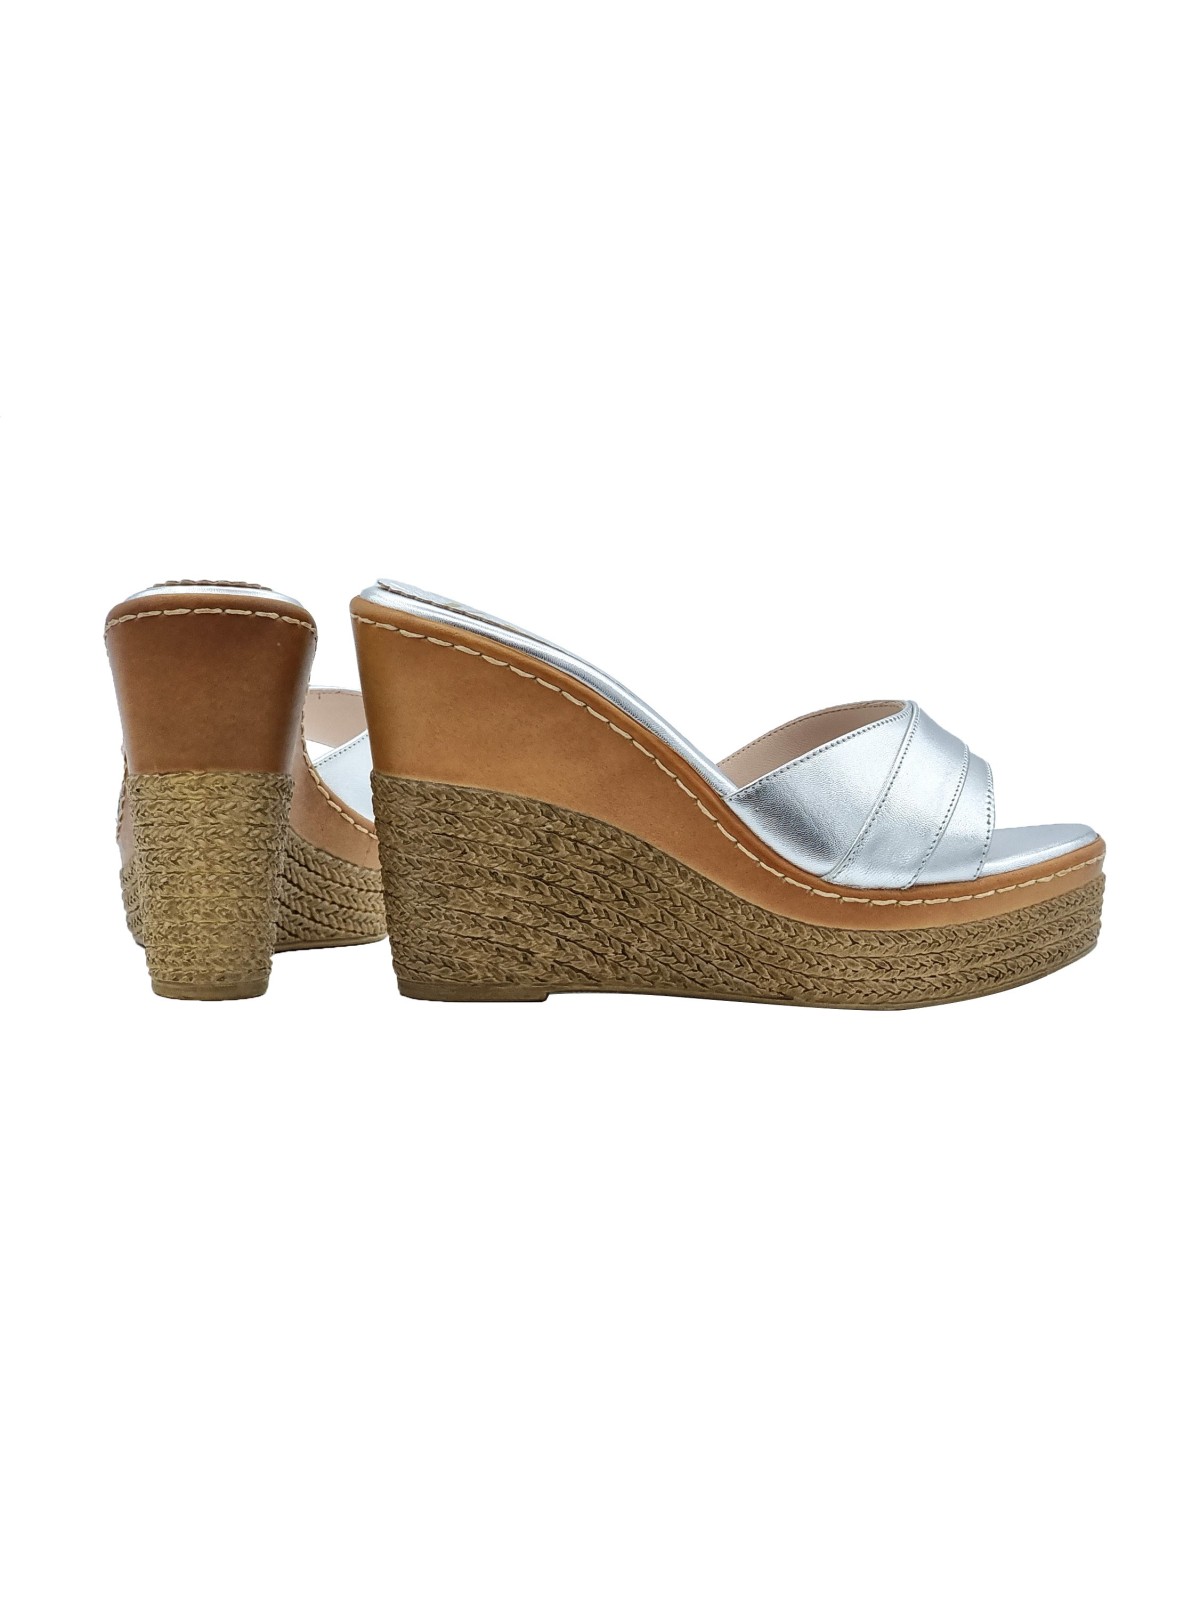 SILVER WEDGES IN LEATHER WITH HEEL 11